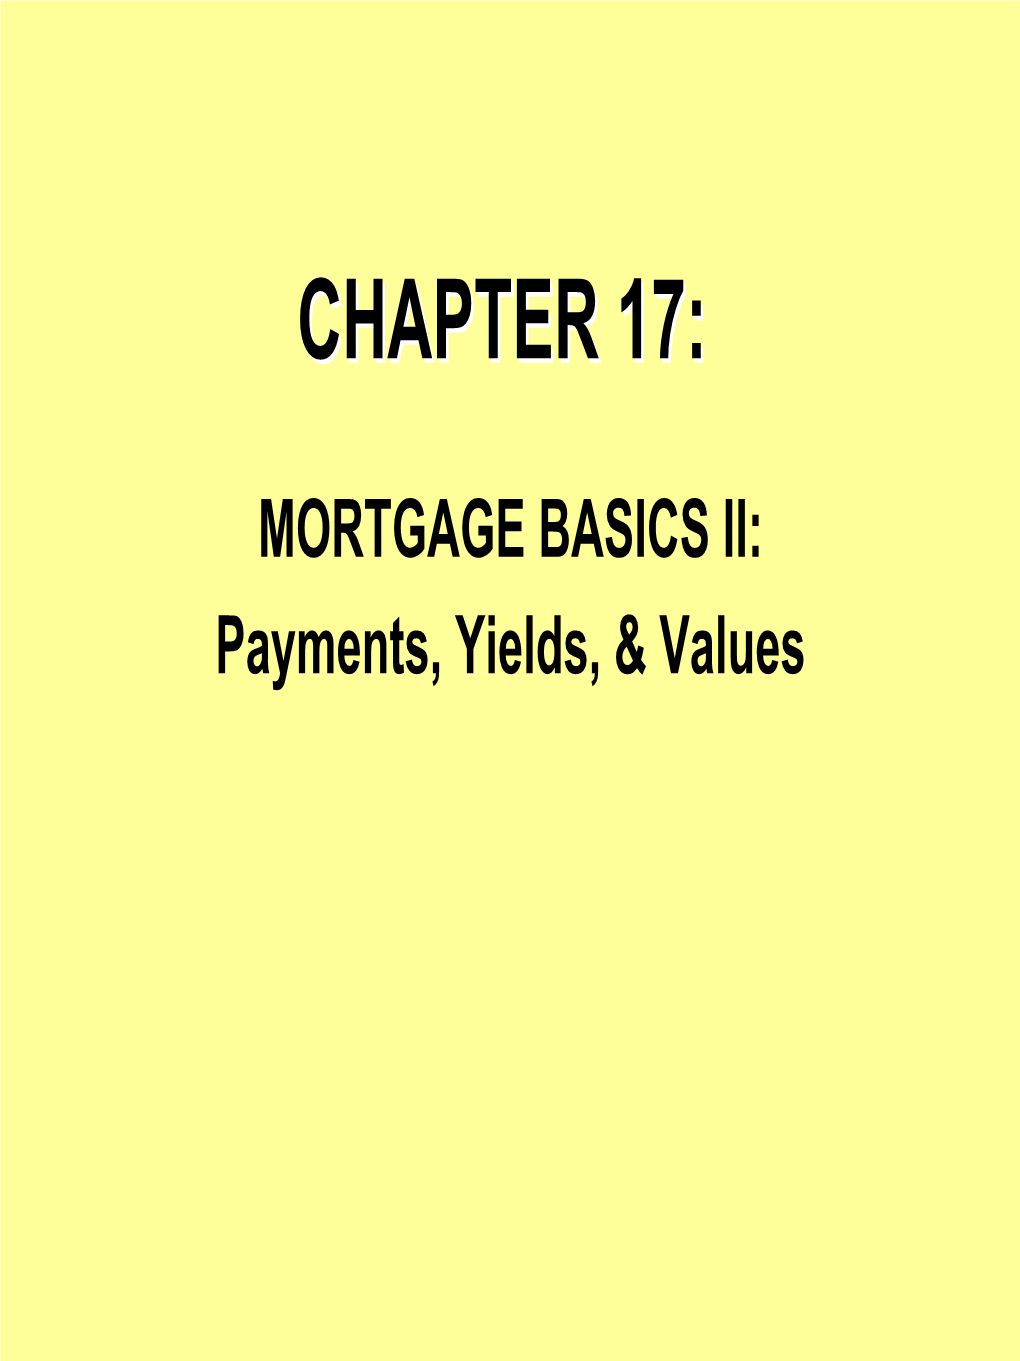 MORTGAGE BASICS II: Payments, Yields, & Values